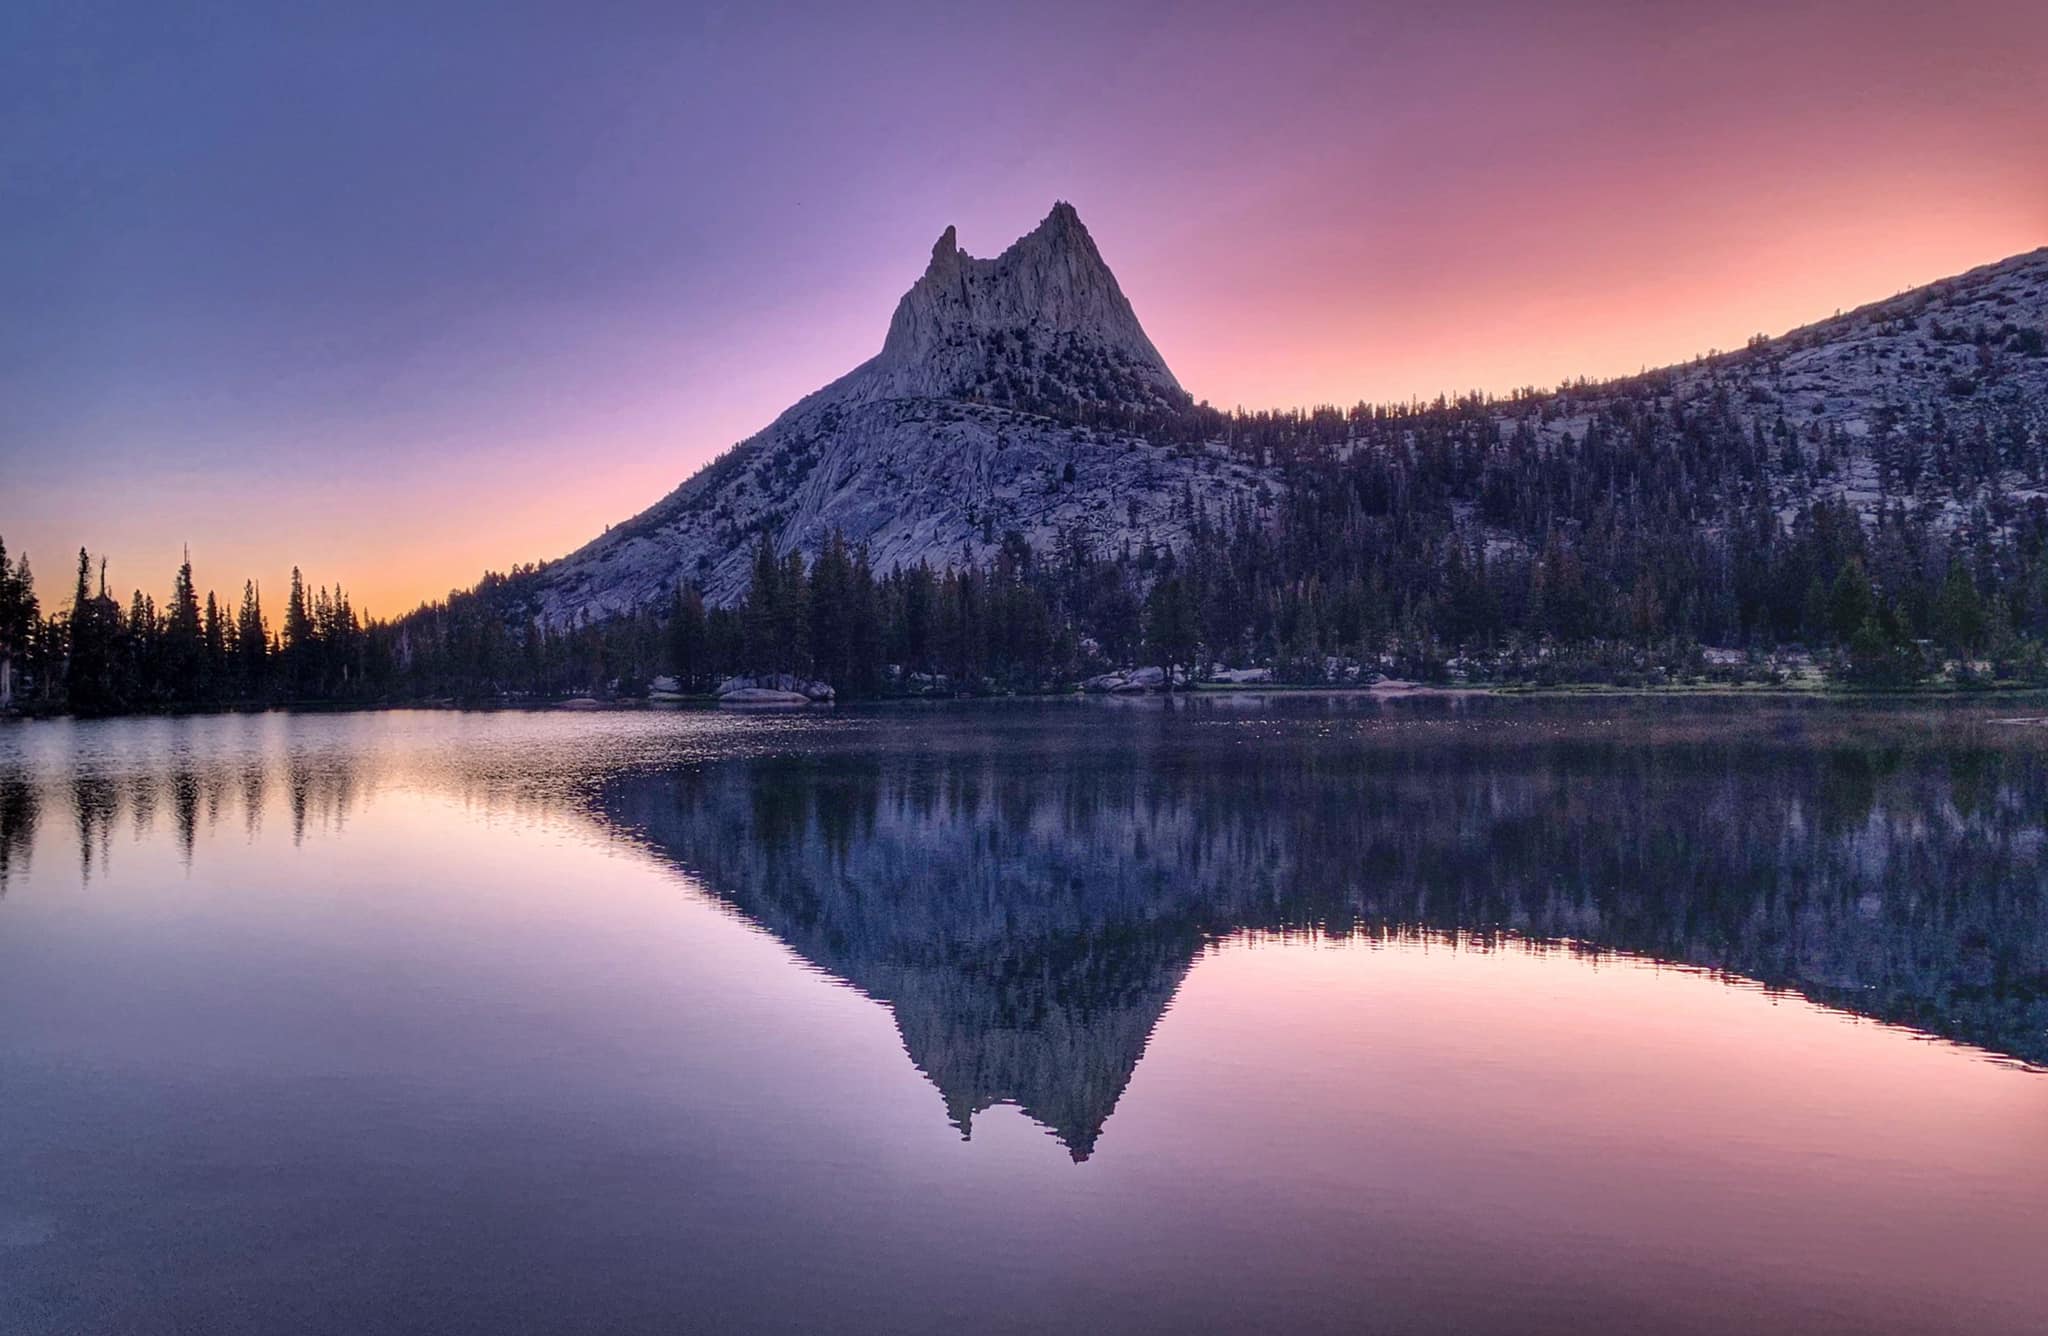 Cathedral Peak and Lower Cathedral Lake